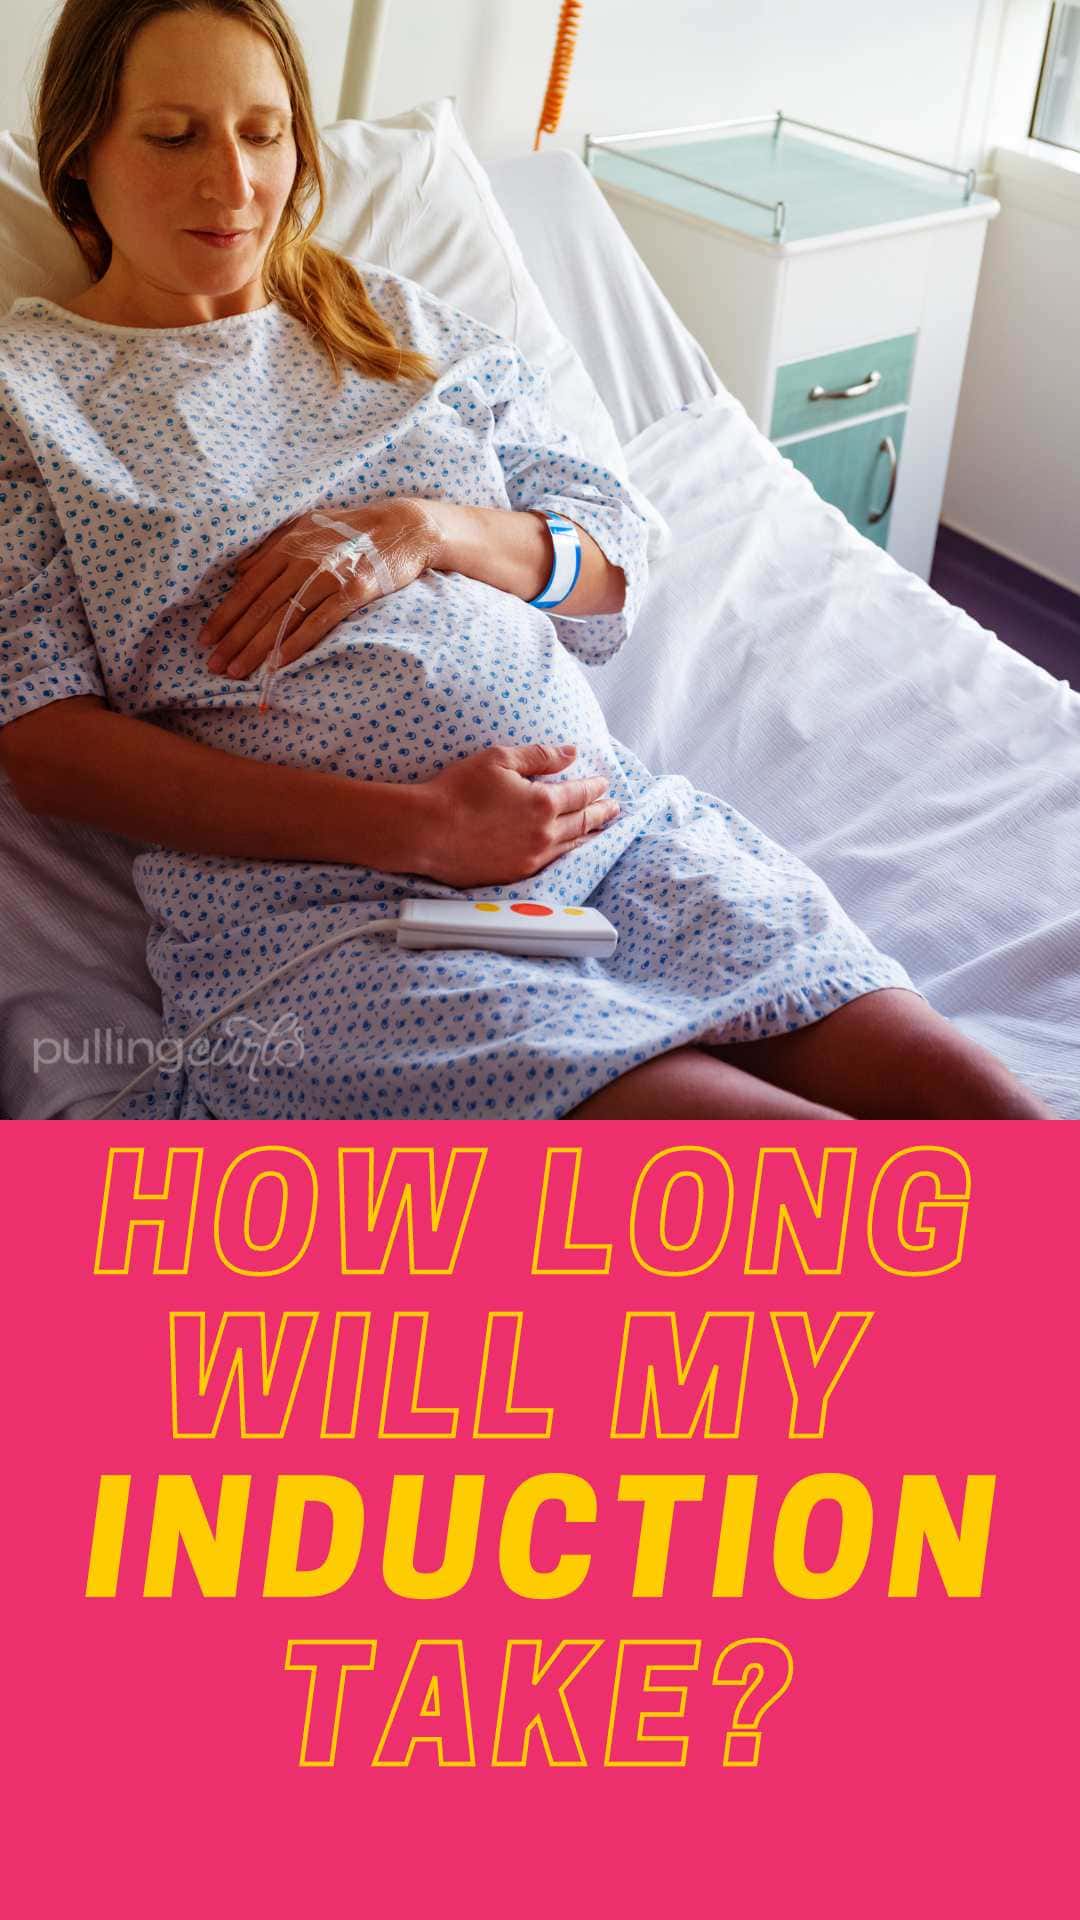 Induction of labor is the process of starting labor artificially using medical methods. The duration of induction of labor can vary depending on several factors, including the method used for induction, the woman's medical history, and the stage of pregnancy. via @pullingcurls